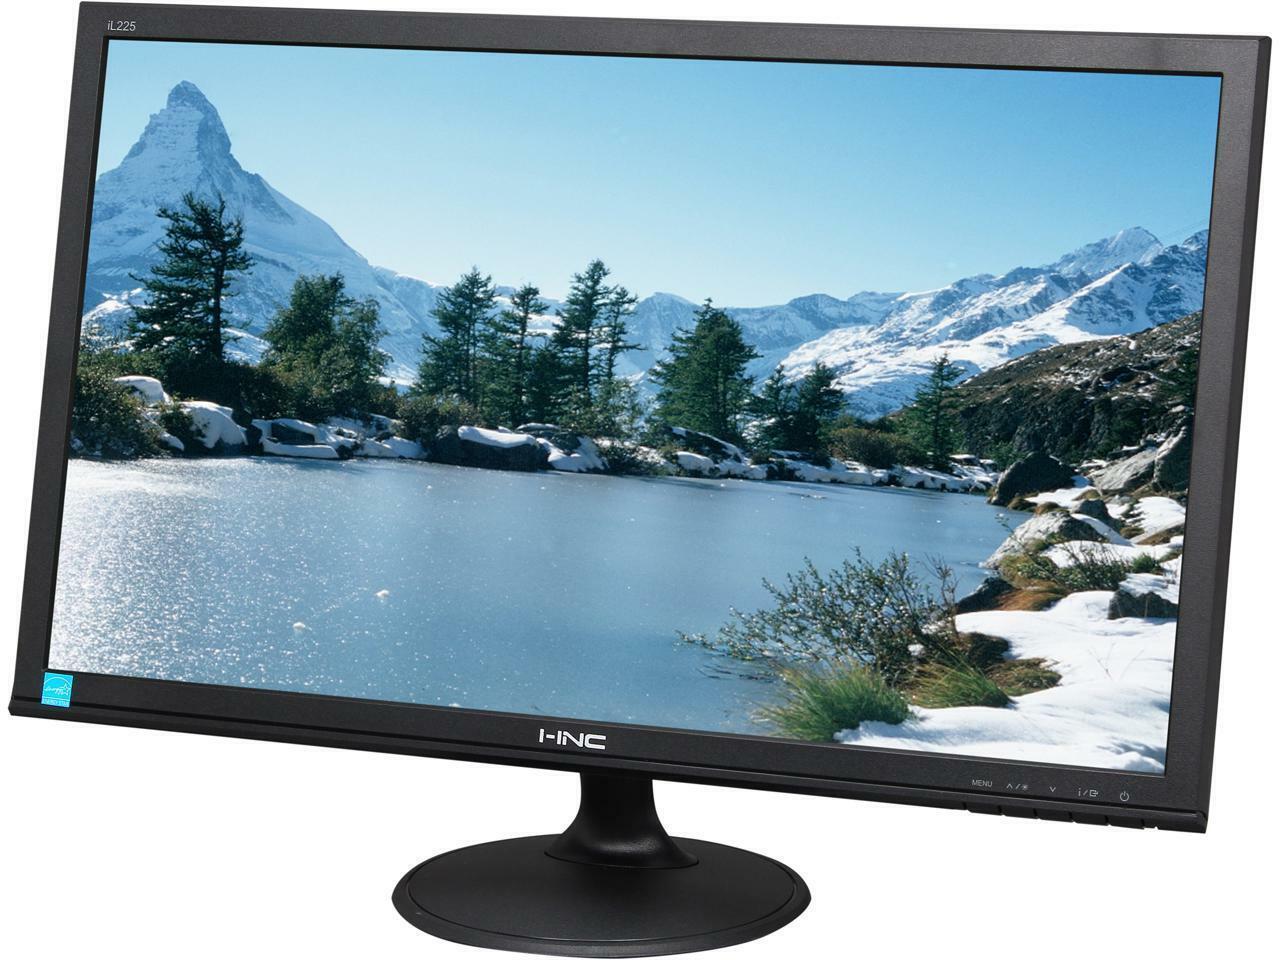 What Is An LCD Monitor